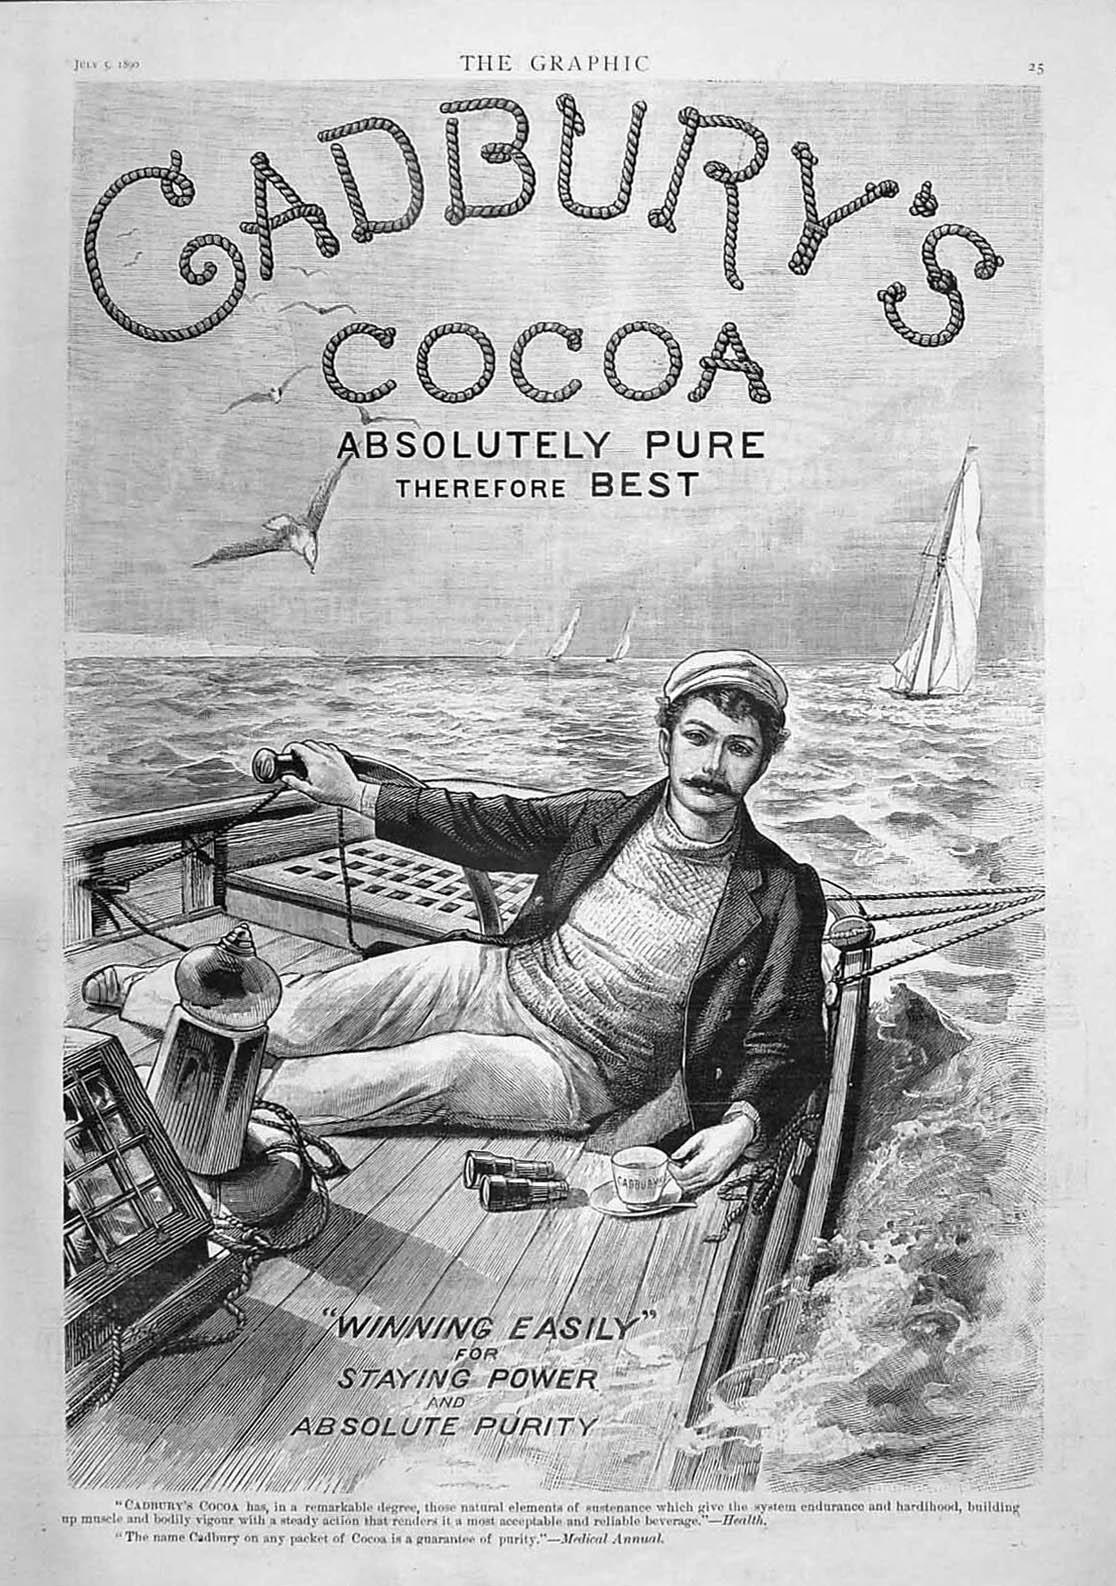 Advertisment for Cadbury’s cocoa, 1890, in “The Graphic.” (Public Domain)